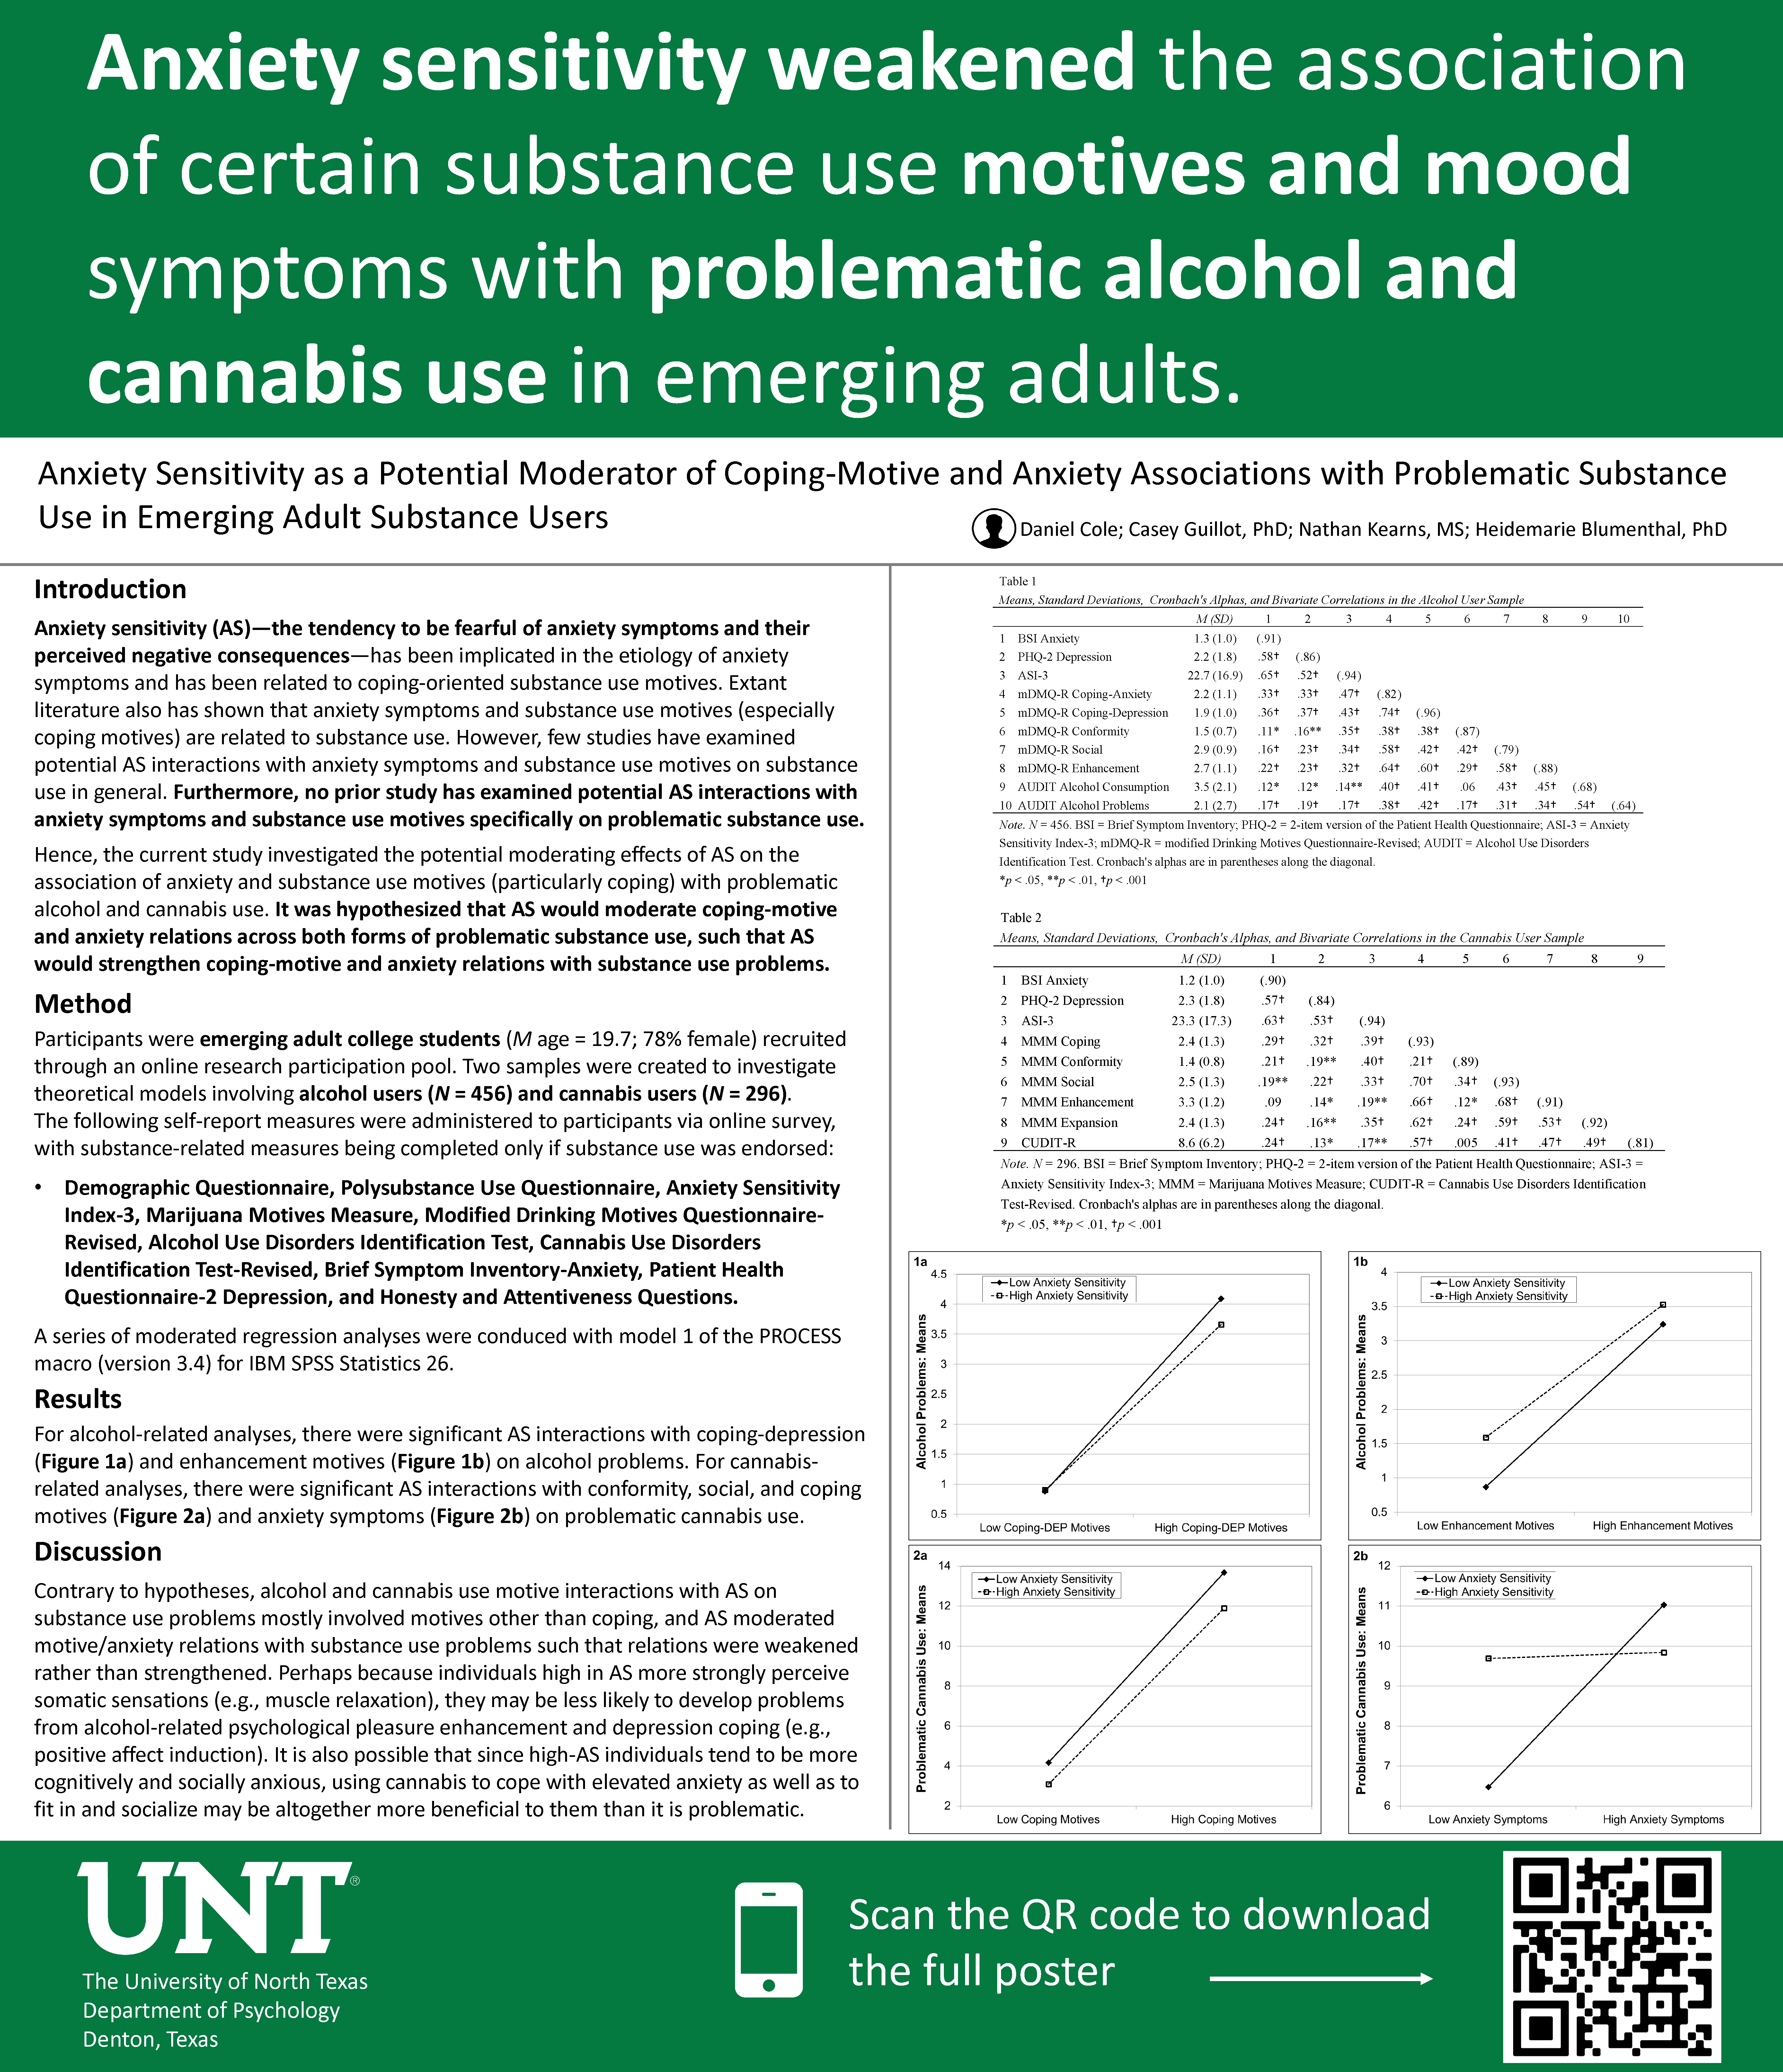 Anxiety Sensitivity as a Potential Moderator of Coping-Motive and Anxiety Associations with Problematic Substance Use